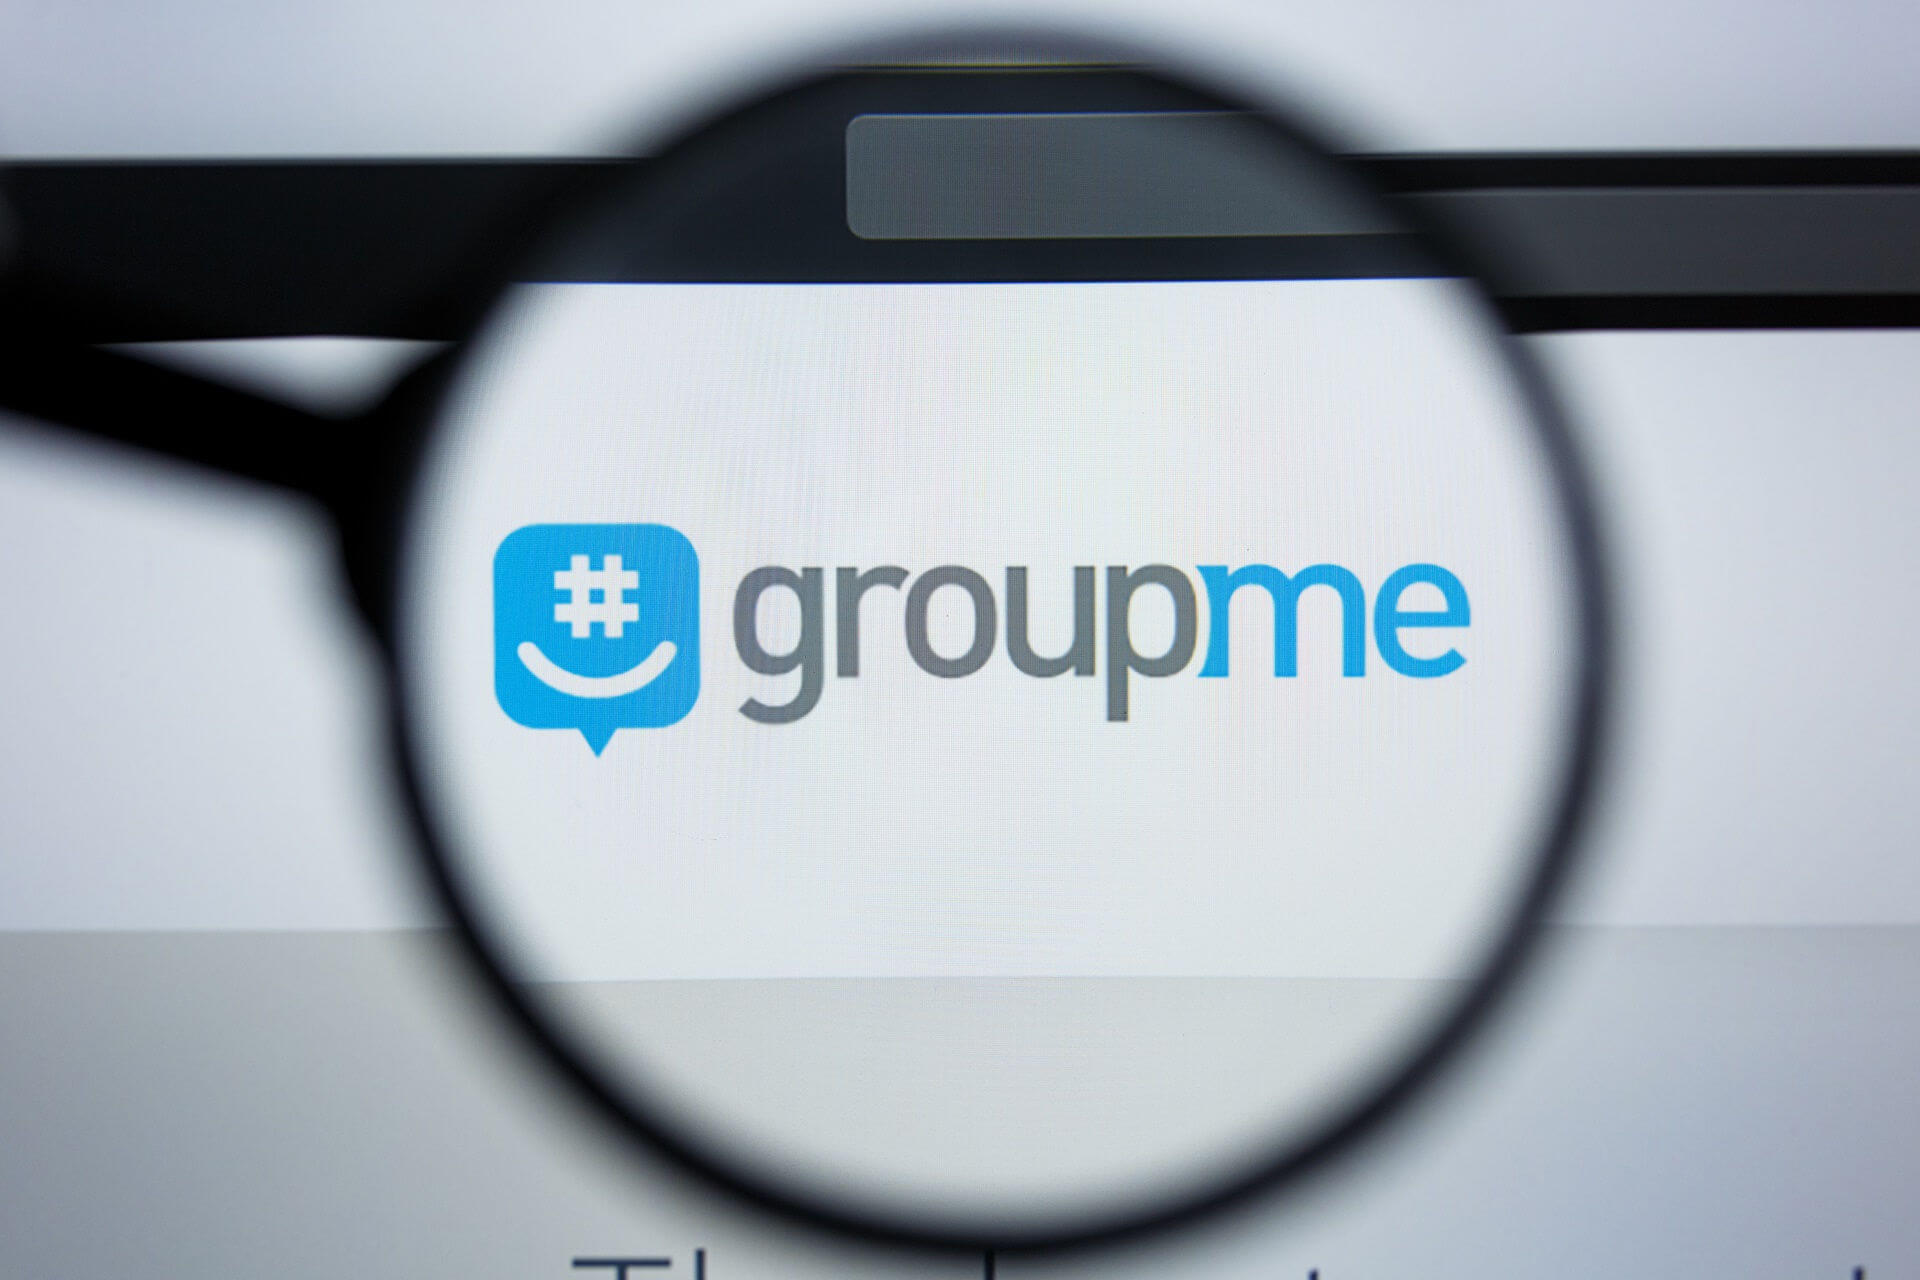 How can I set the dark theme in the new GroupMe for Windows 10